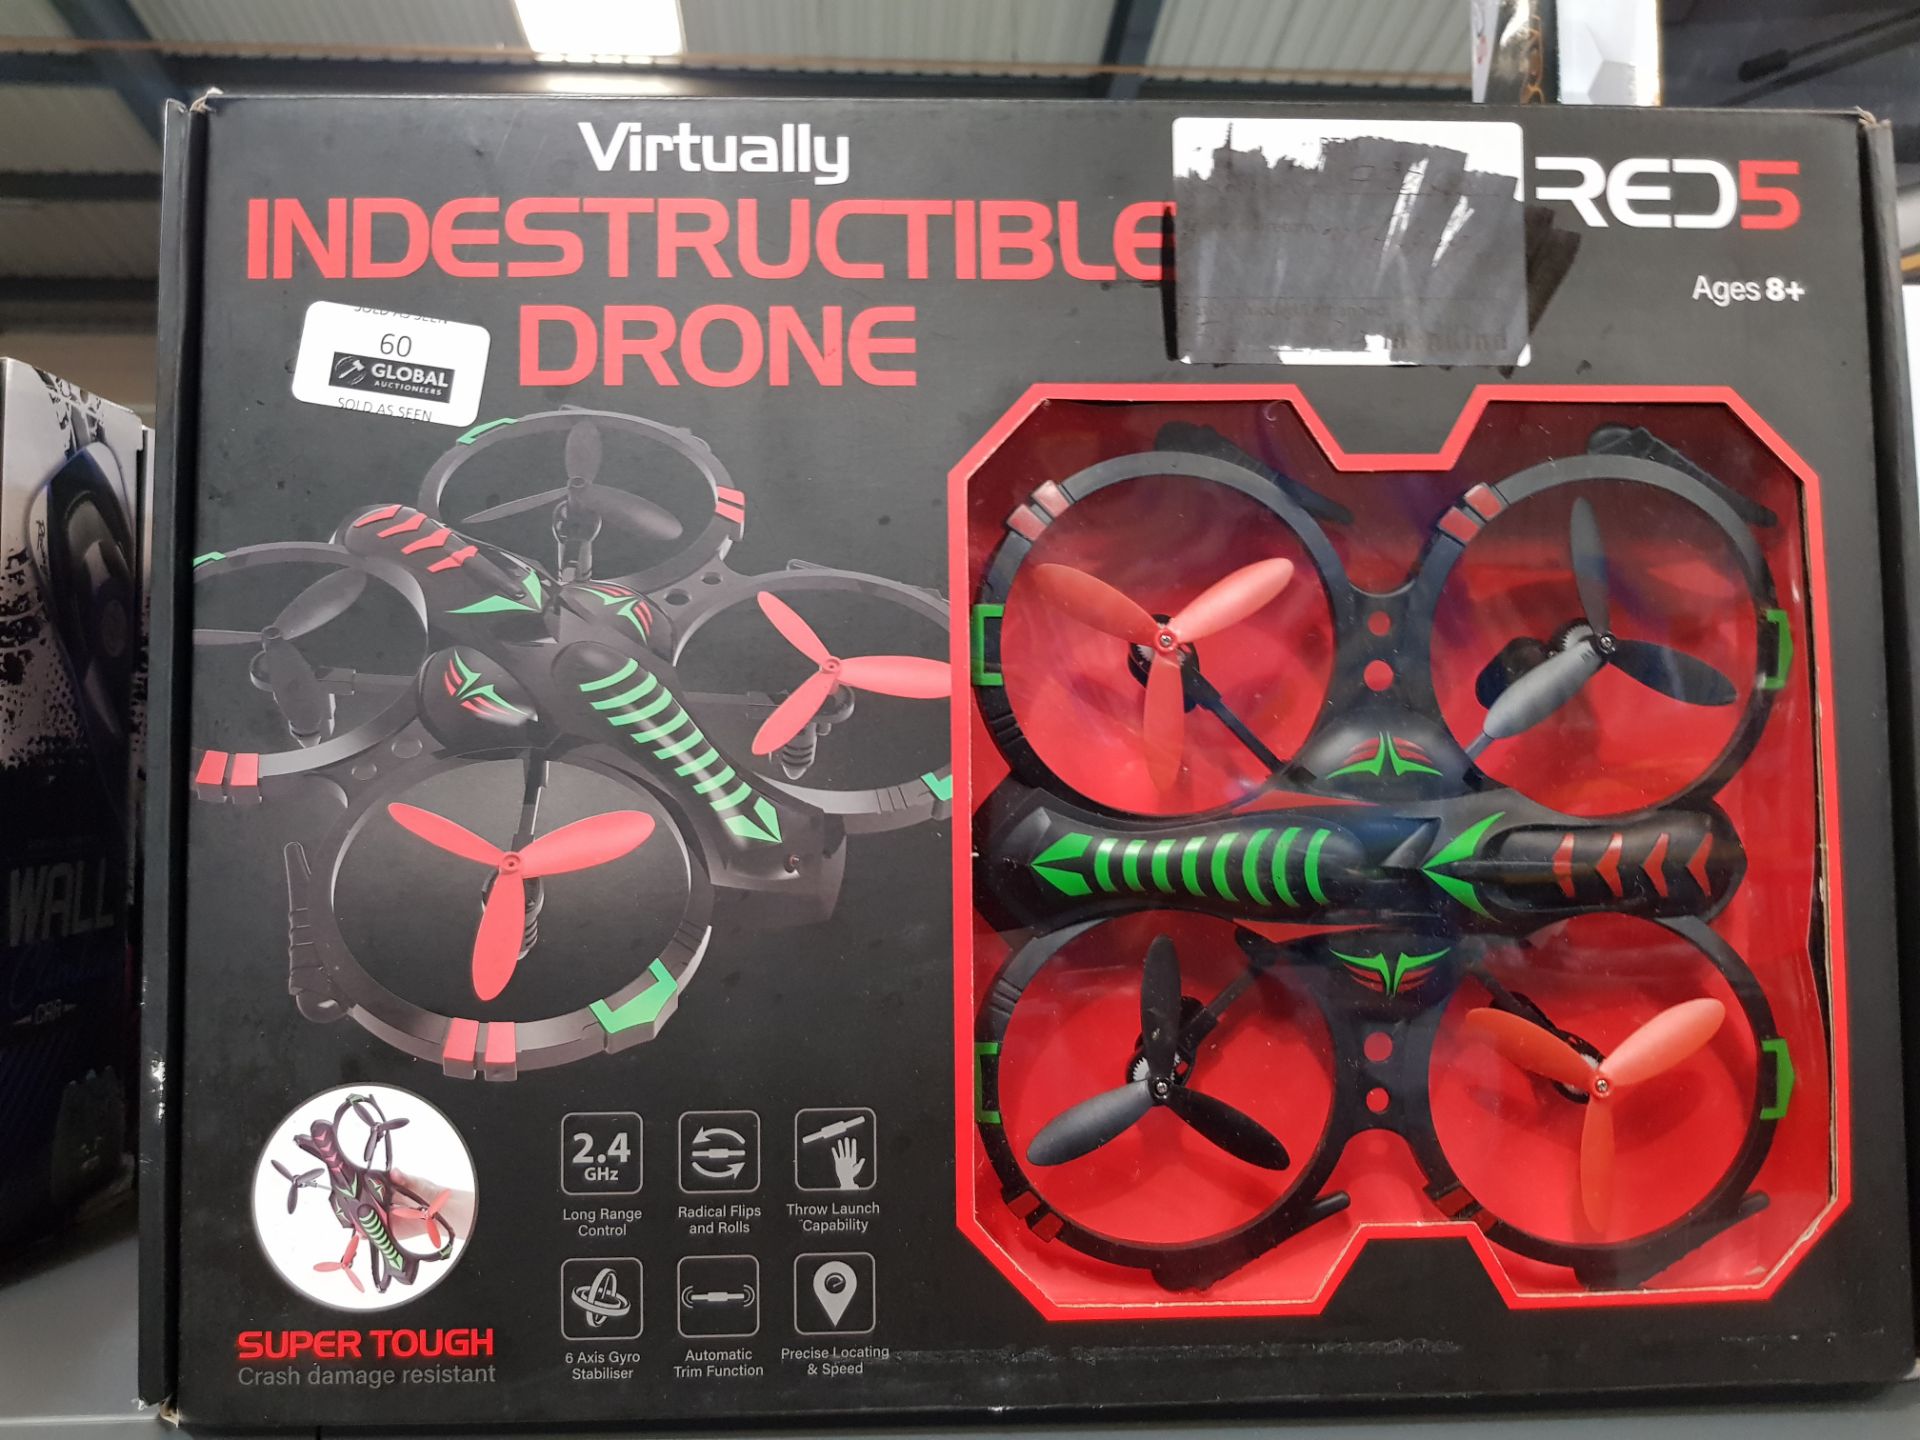 10 X RED5 VIRTUALLY INDESTRUCTIBLE DRONE